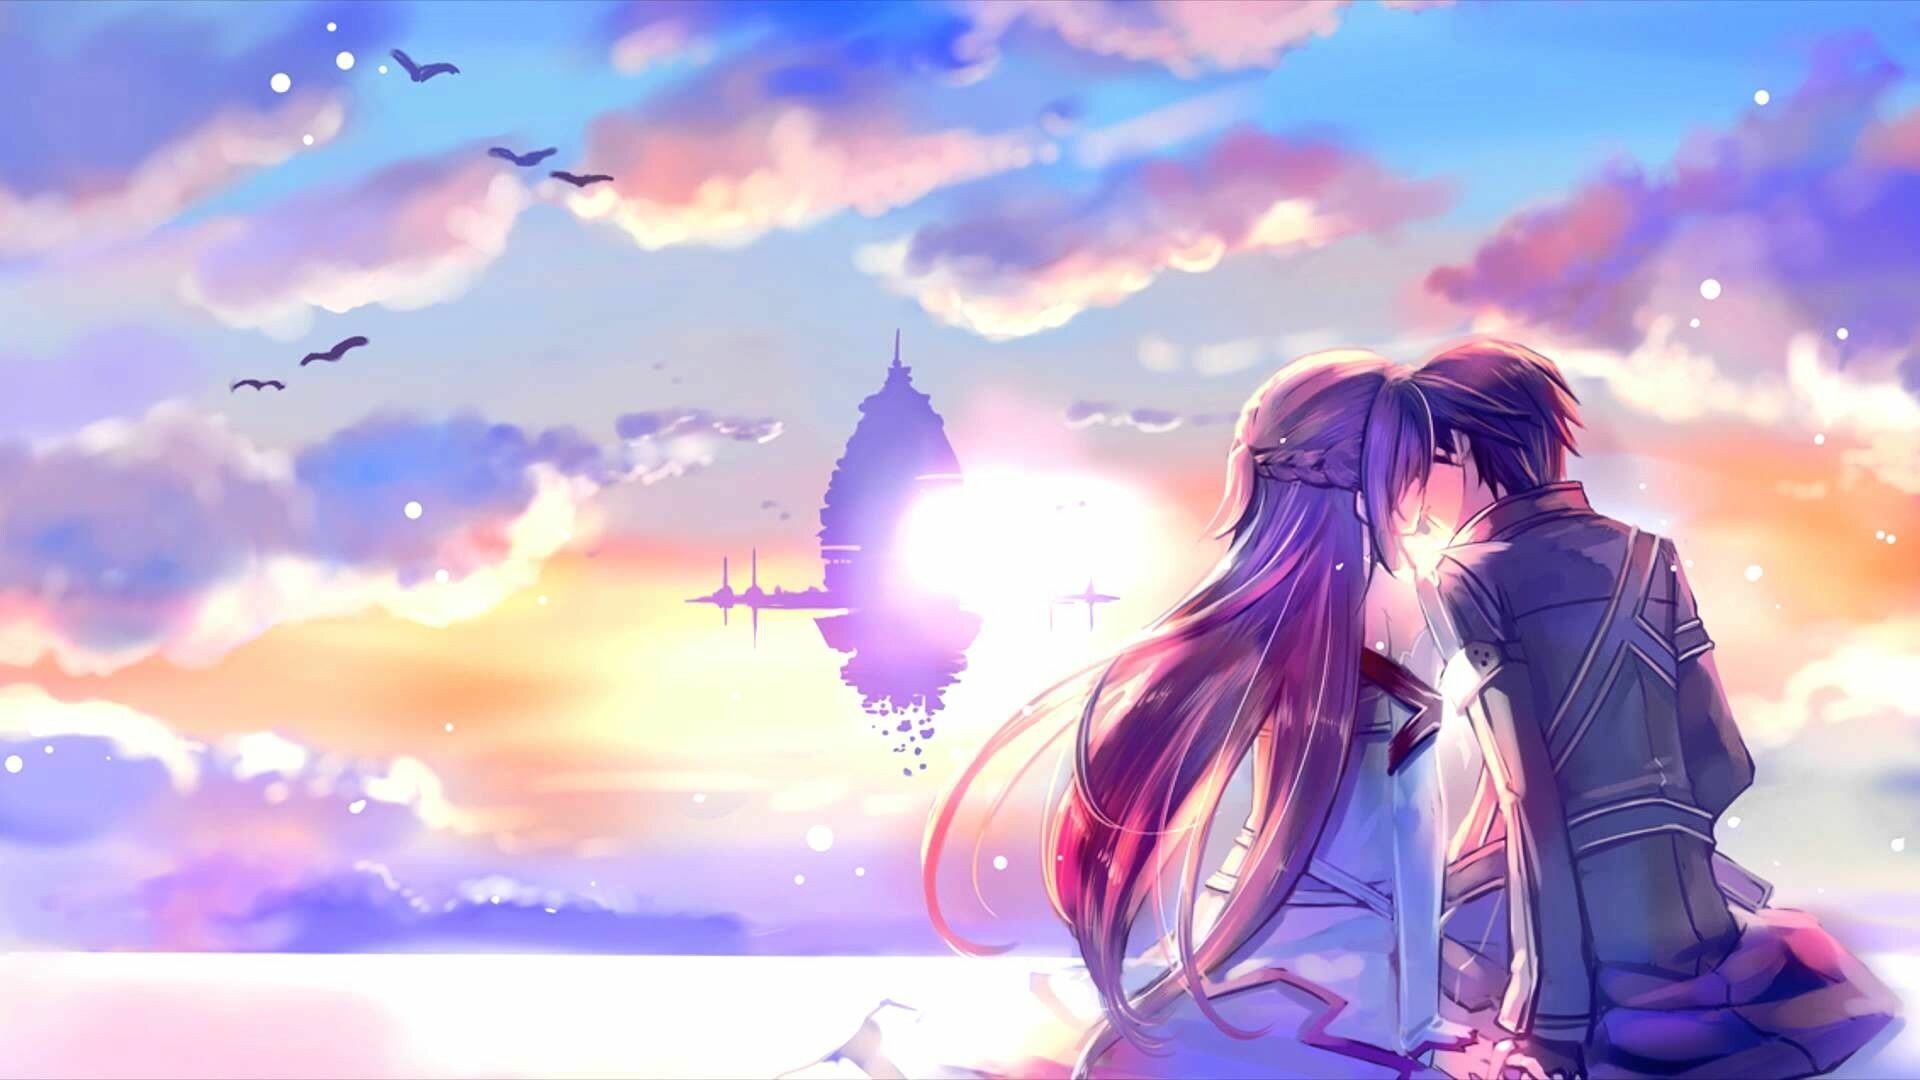 51+ Anime Love Wallpapers: HD, 4K, 5K for PC and Mobile | Download free  images for iPhone, Android